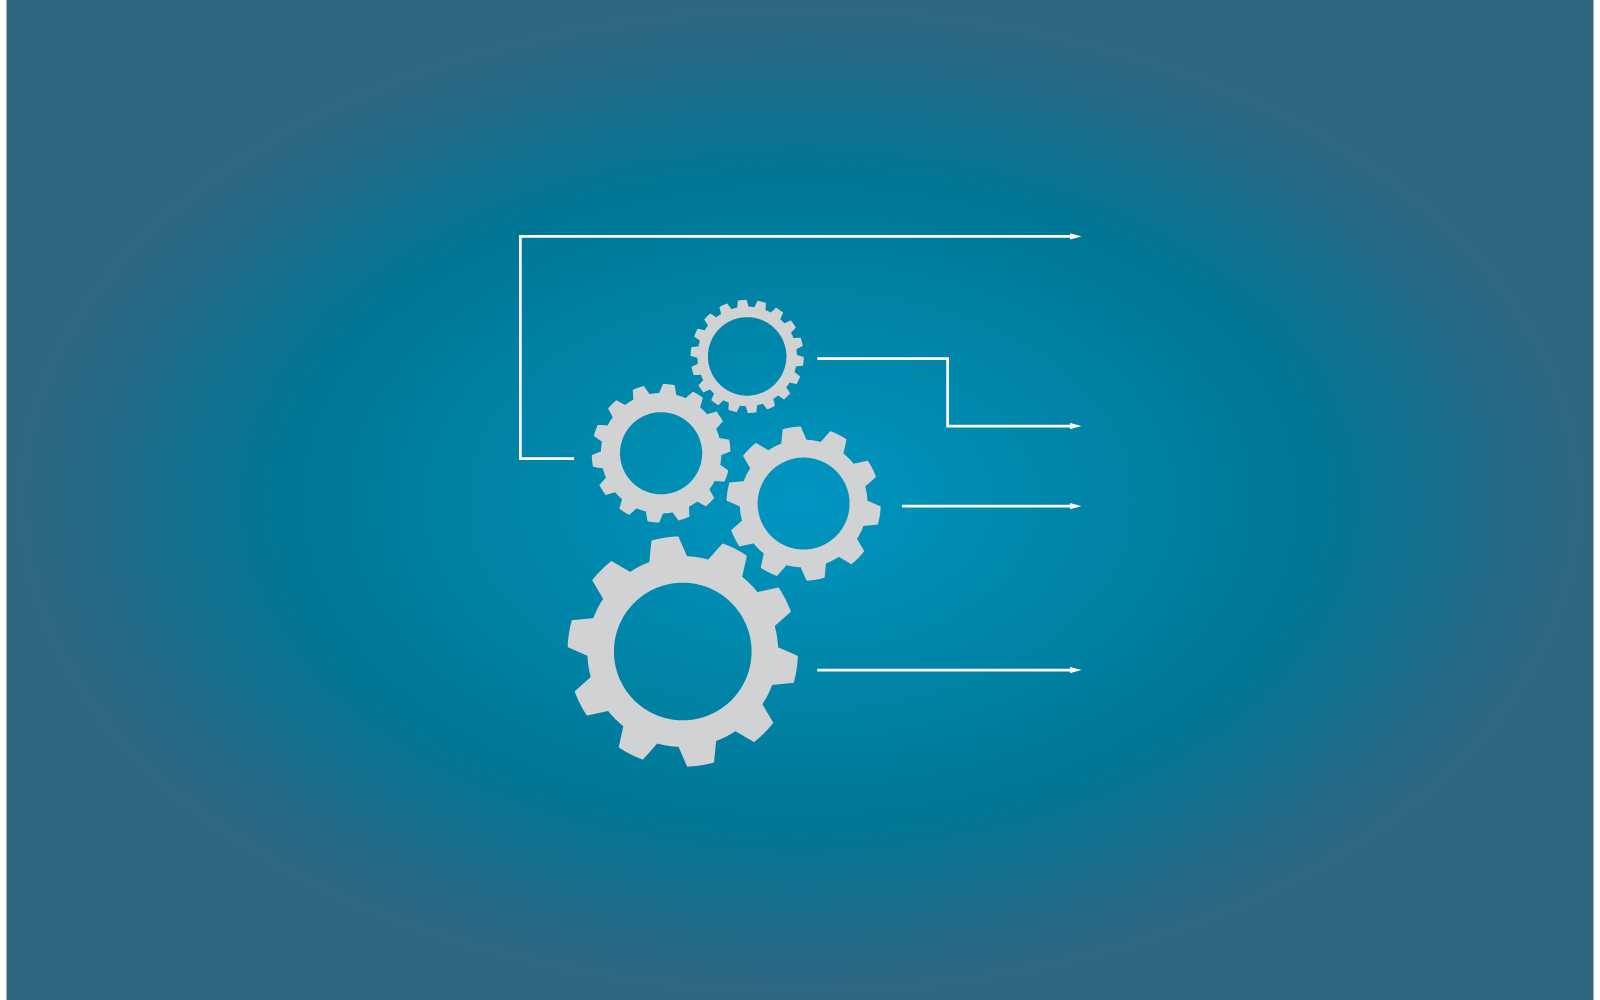 Under construction background with gears logo vector flat design